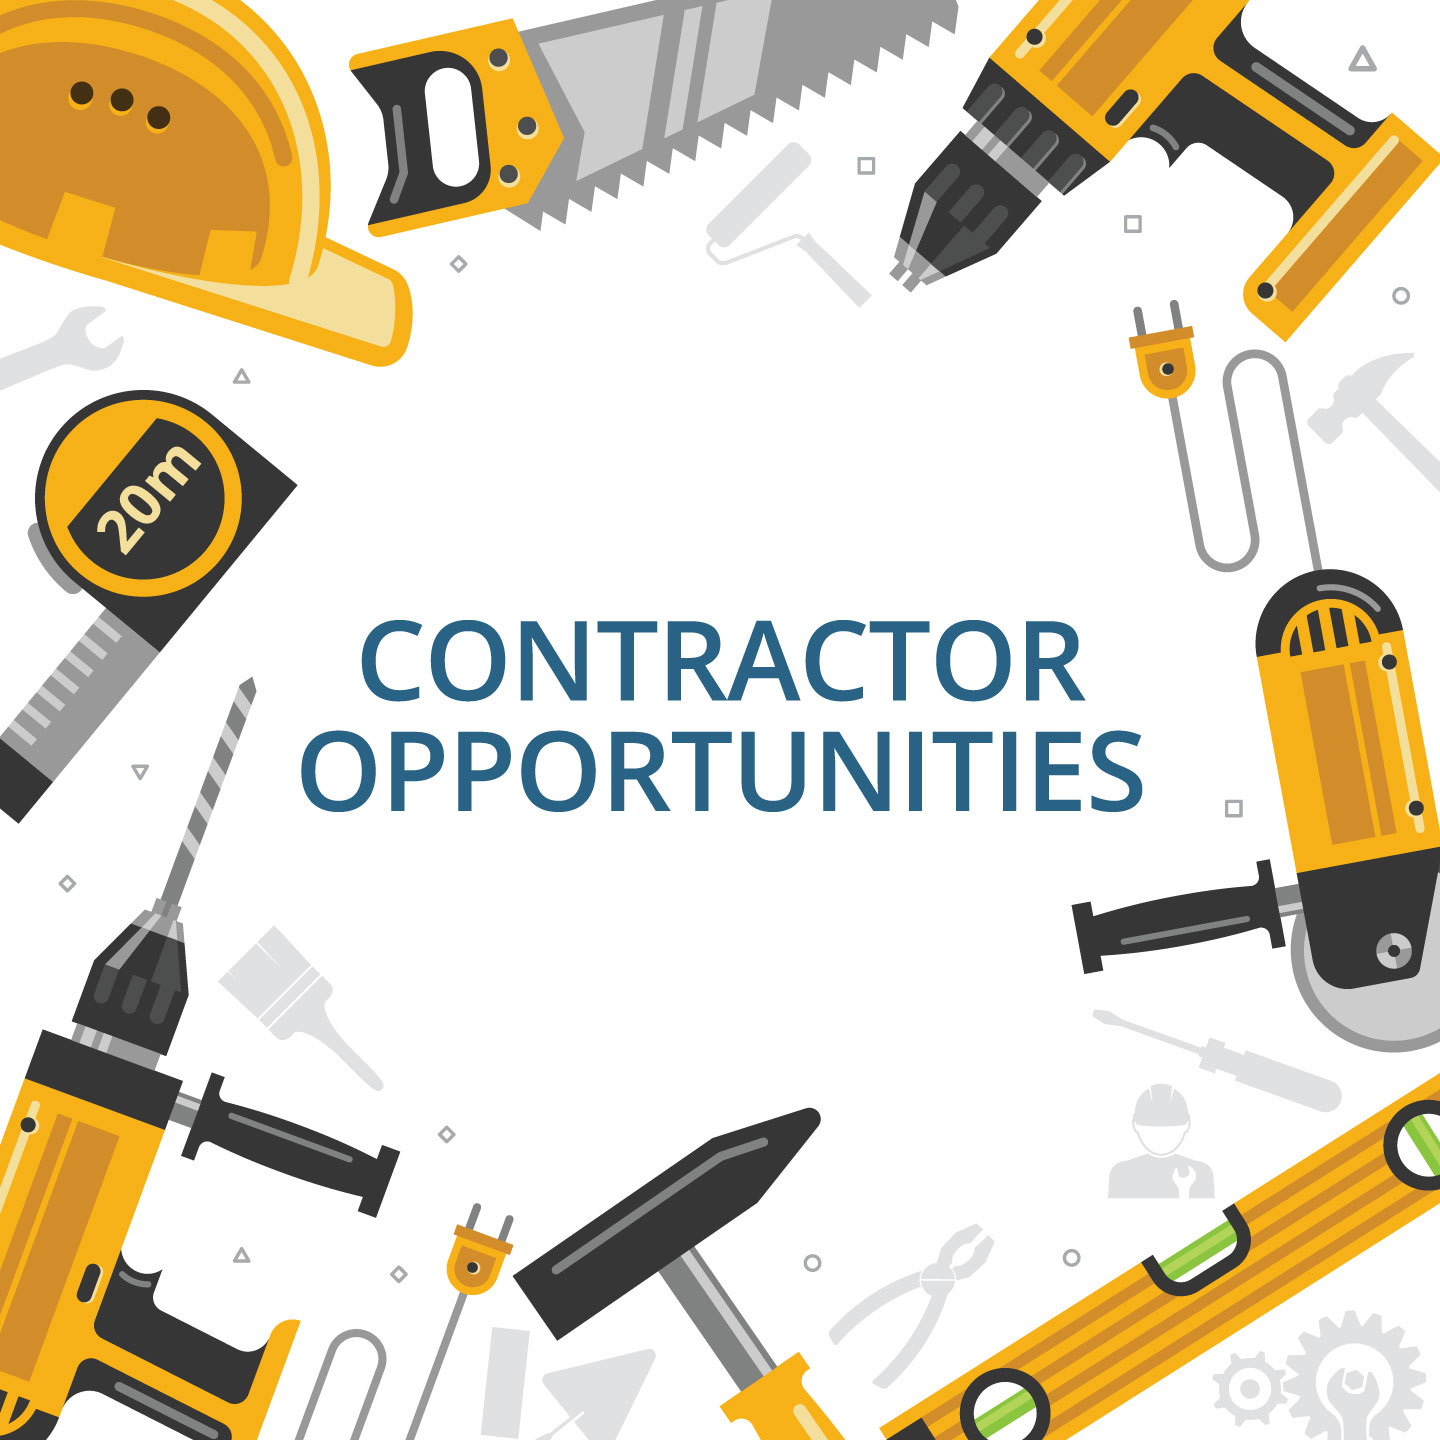 image of contractor opportunities promotion